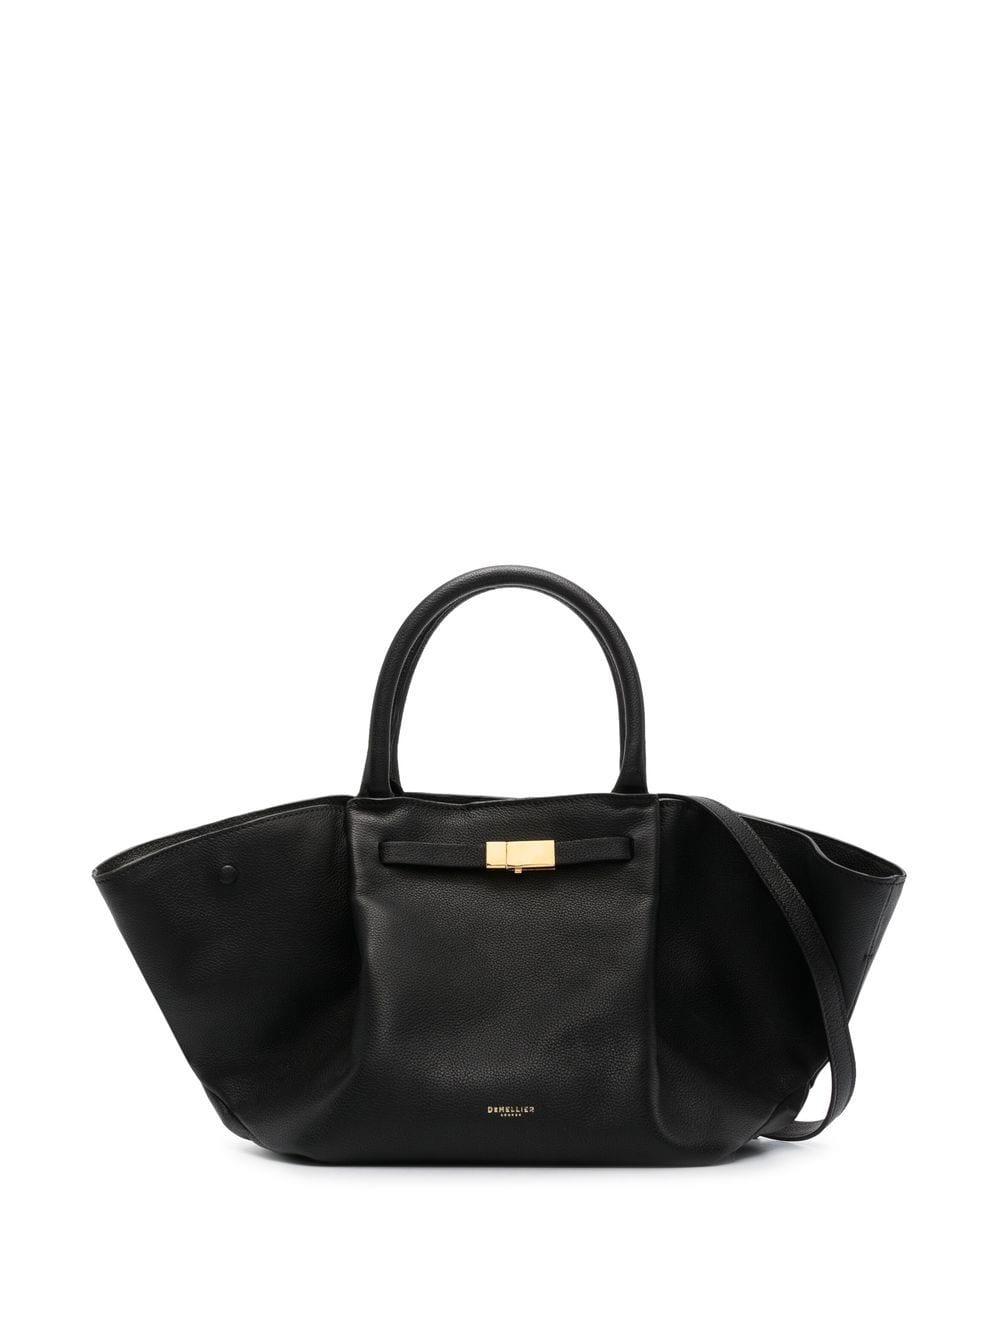 DeMellier Oversized Leather Tote Bag in Black | Lyst